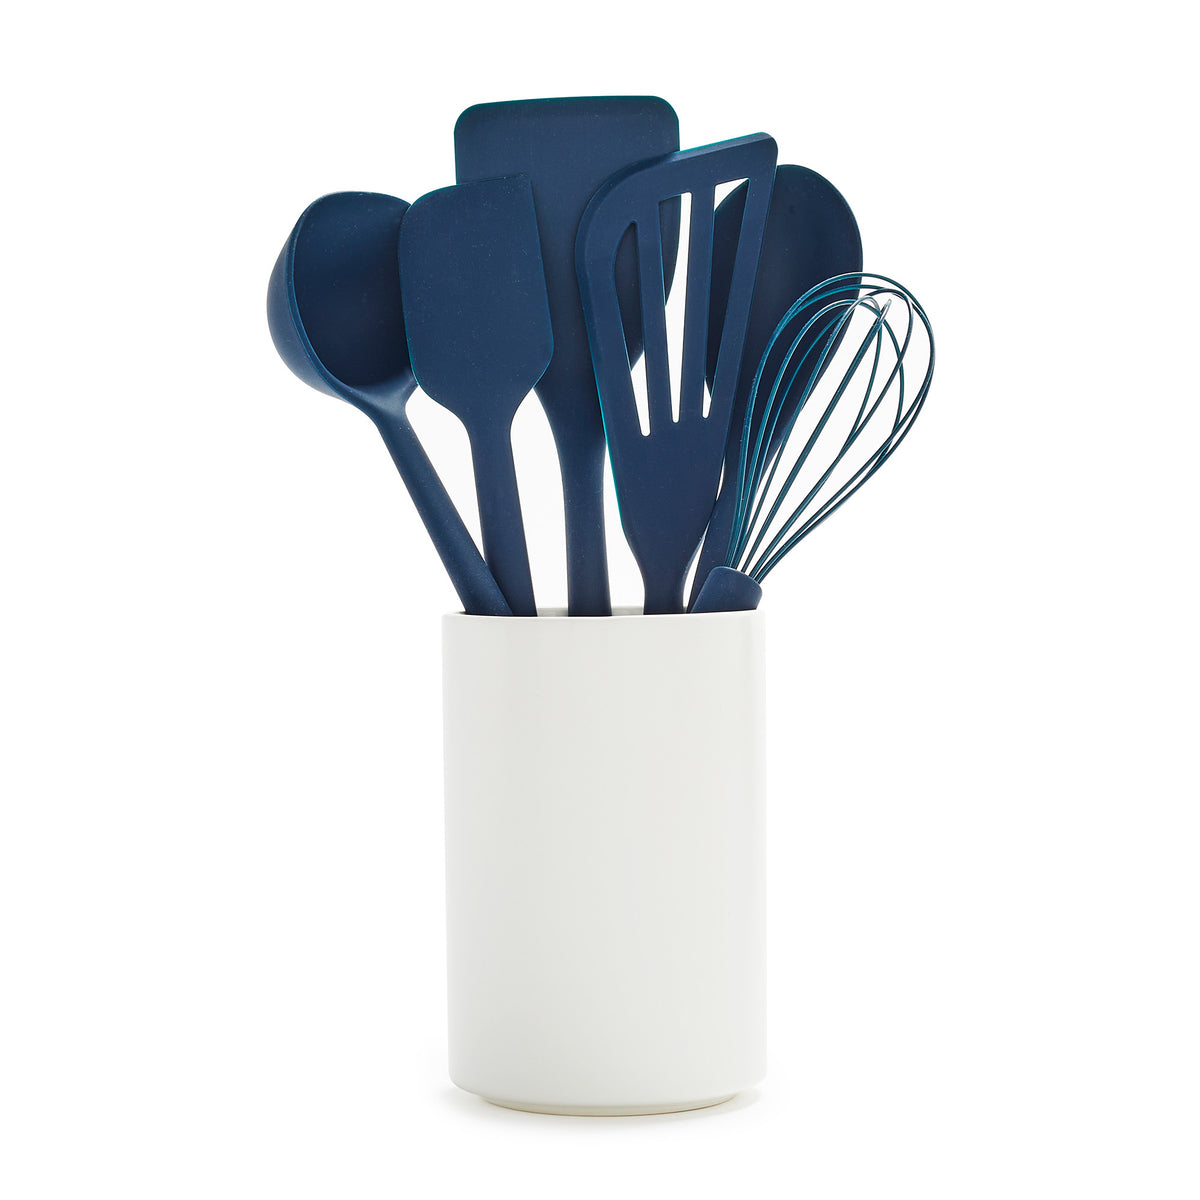 Healthy Non-Toxic PFAS Free Cookware - Platinum Silicone Tools 3-Piece Utensil Set | Navy by GreenPan